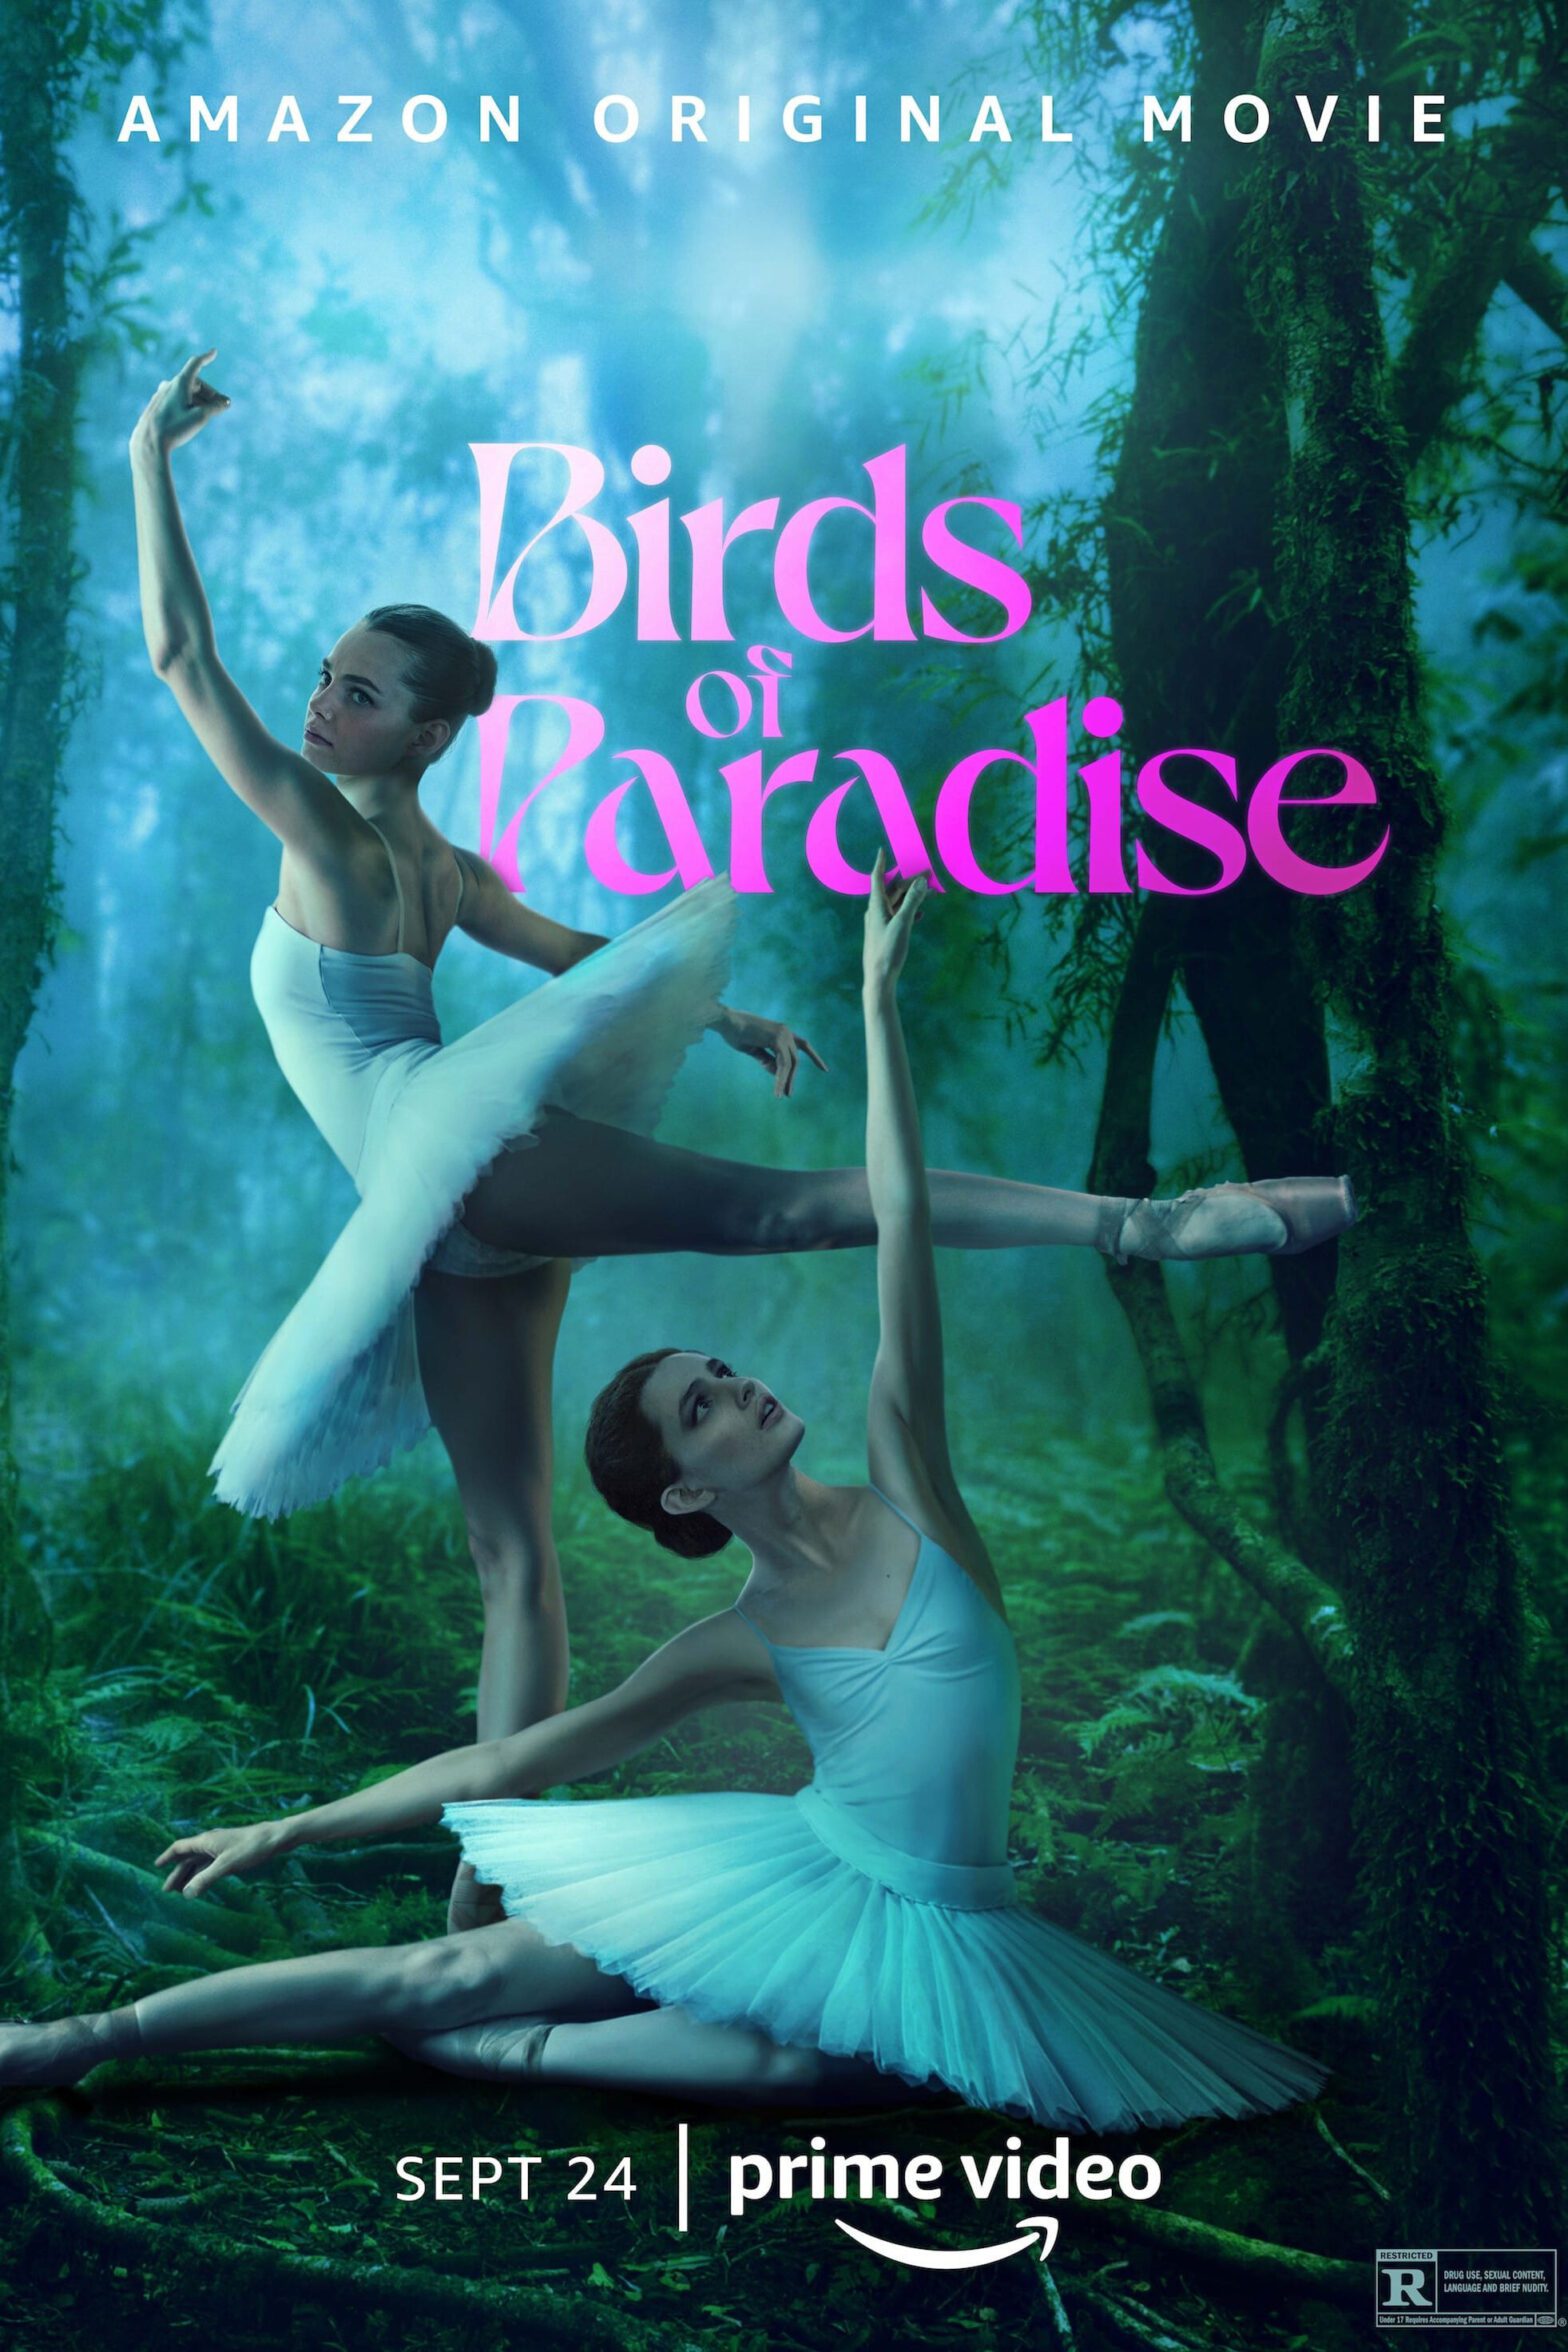 Poster for the movie "Birds of Paradise"